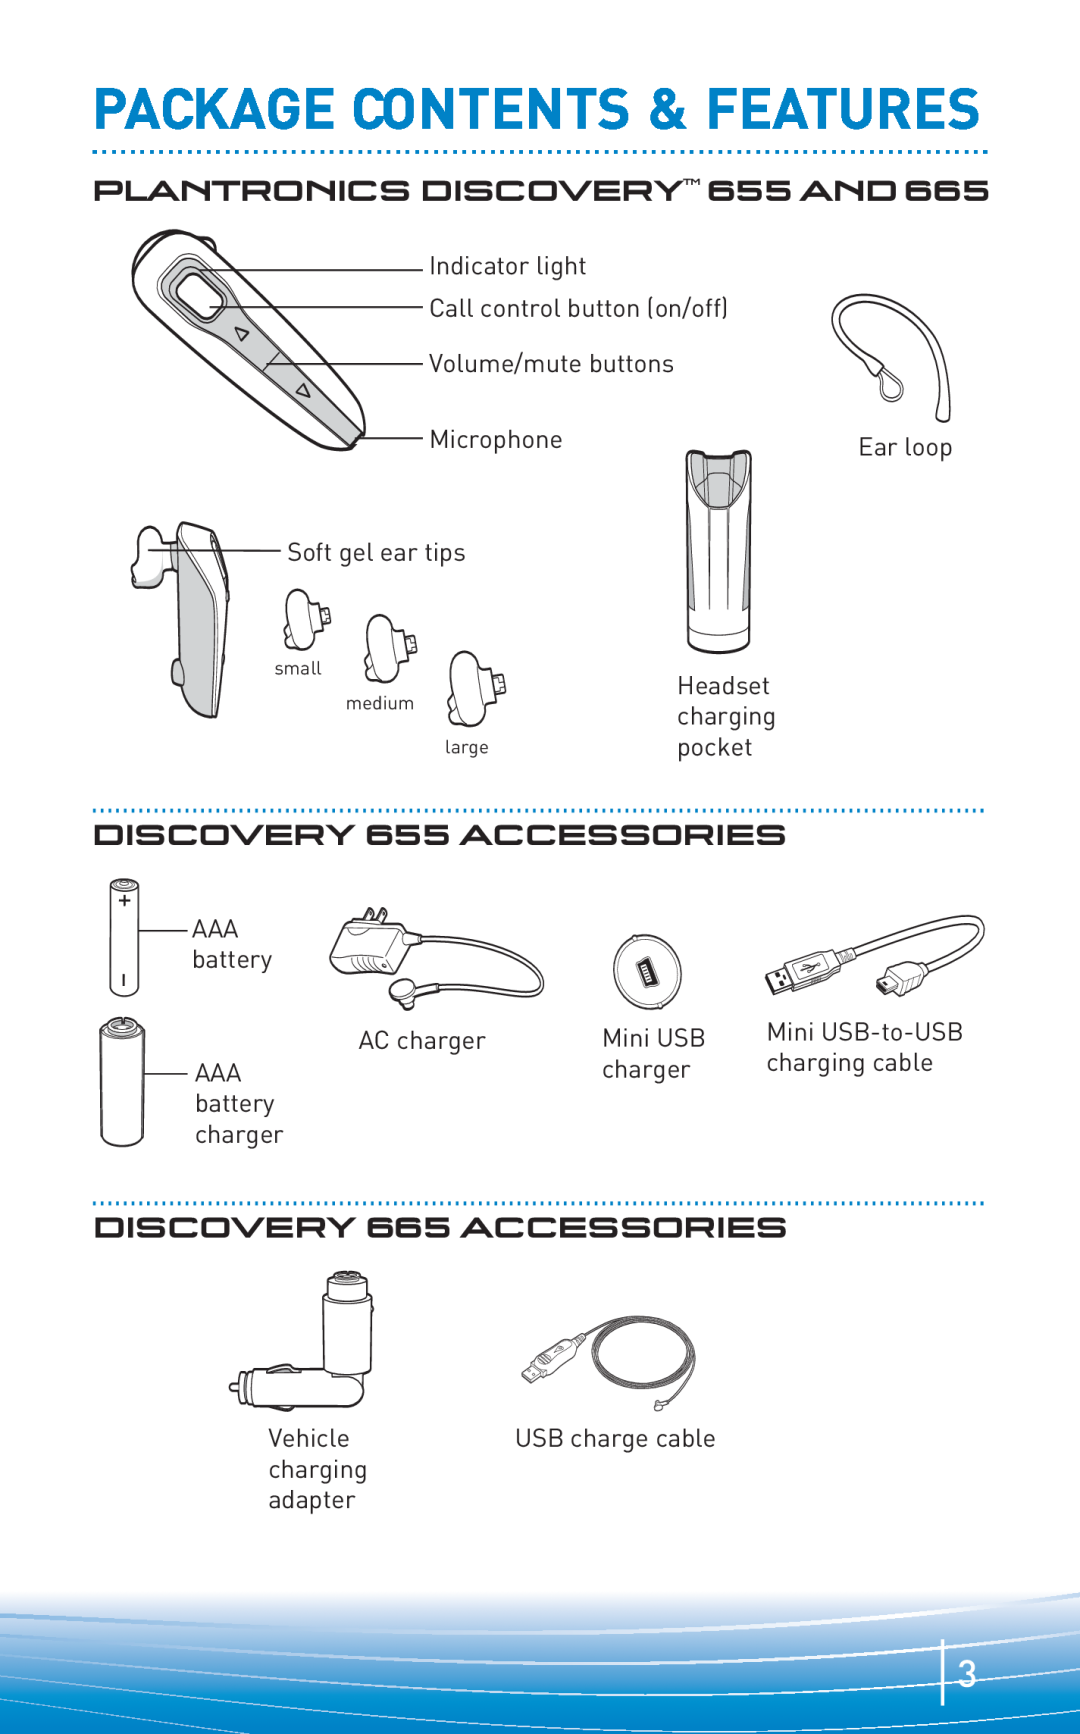 Plantronics none manual Package Contents & Features, PLANTRONICS DISCOVERYTM 655AND665, DISCOVERY 655ACCESSORIES 